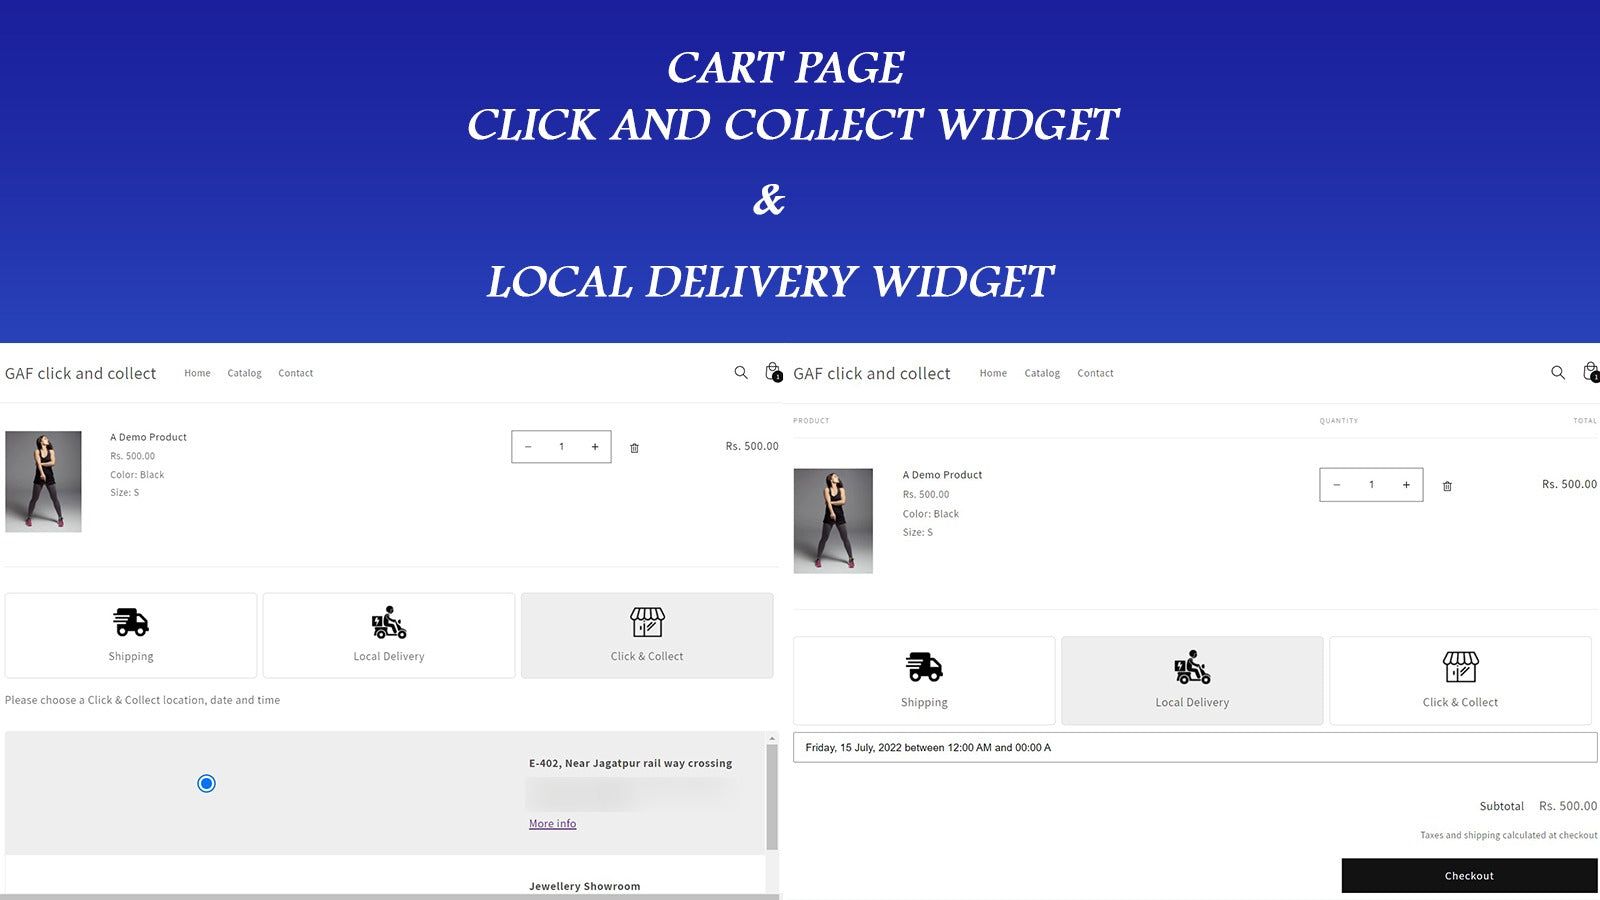 Widget show on cart page for Pickup Delivery and Shipping option